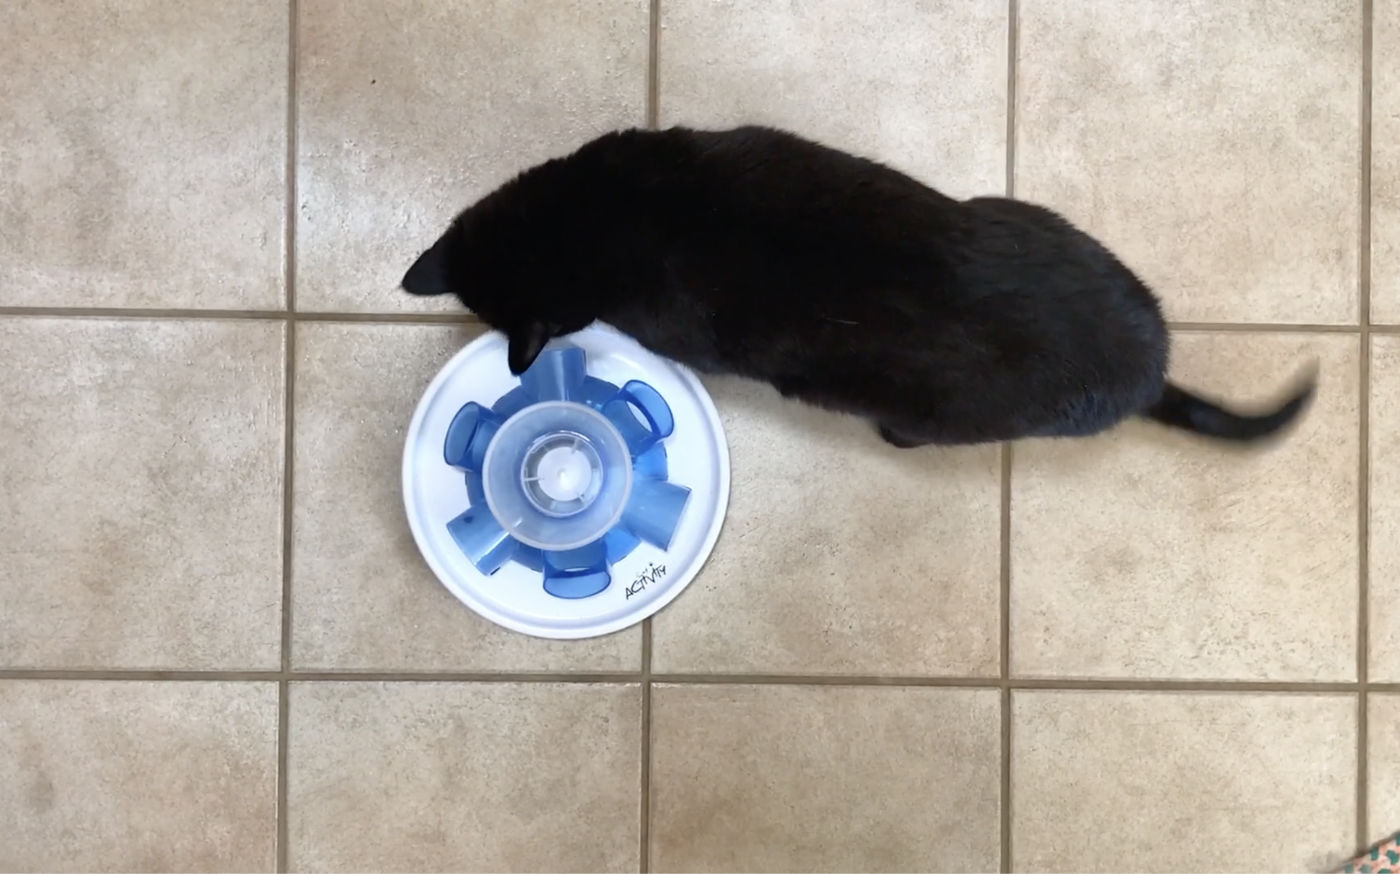 Food puzzles for cats: Feeding for physical and emotional